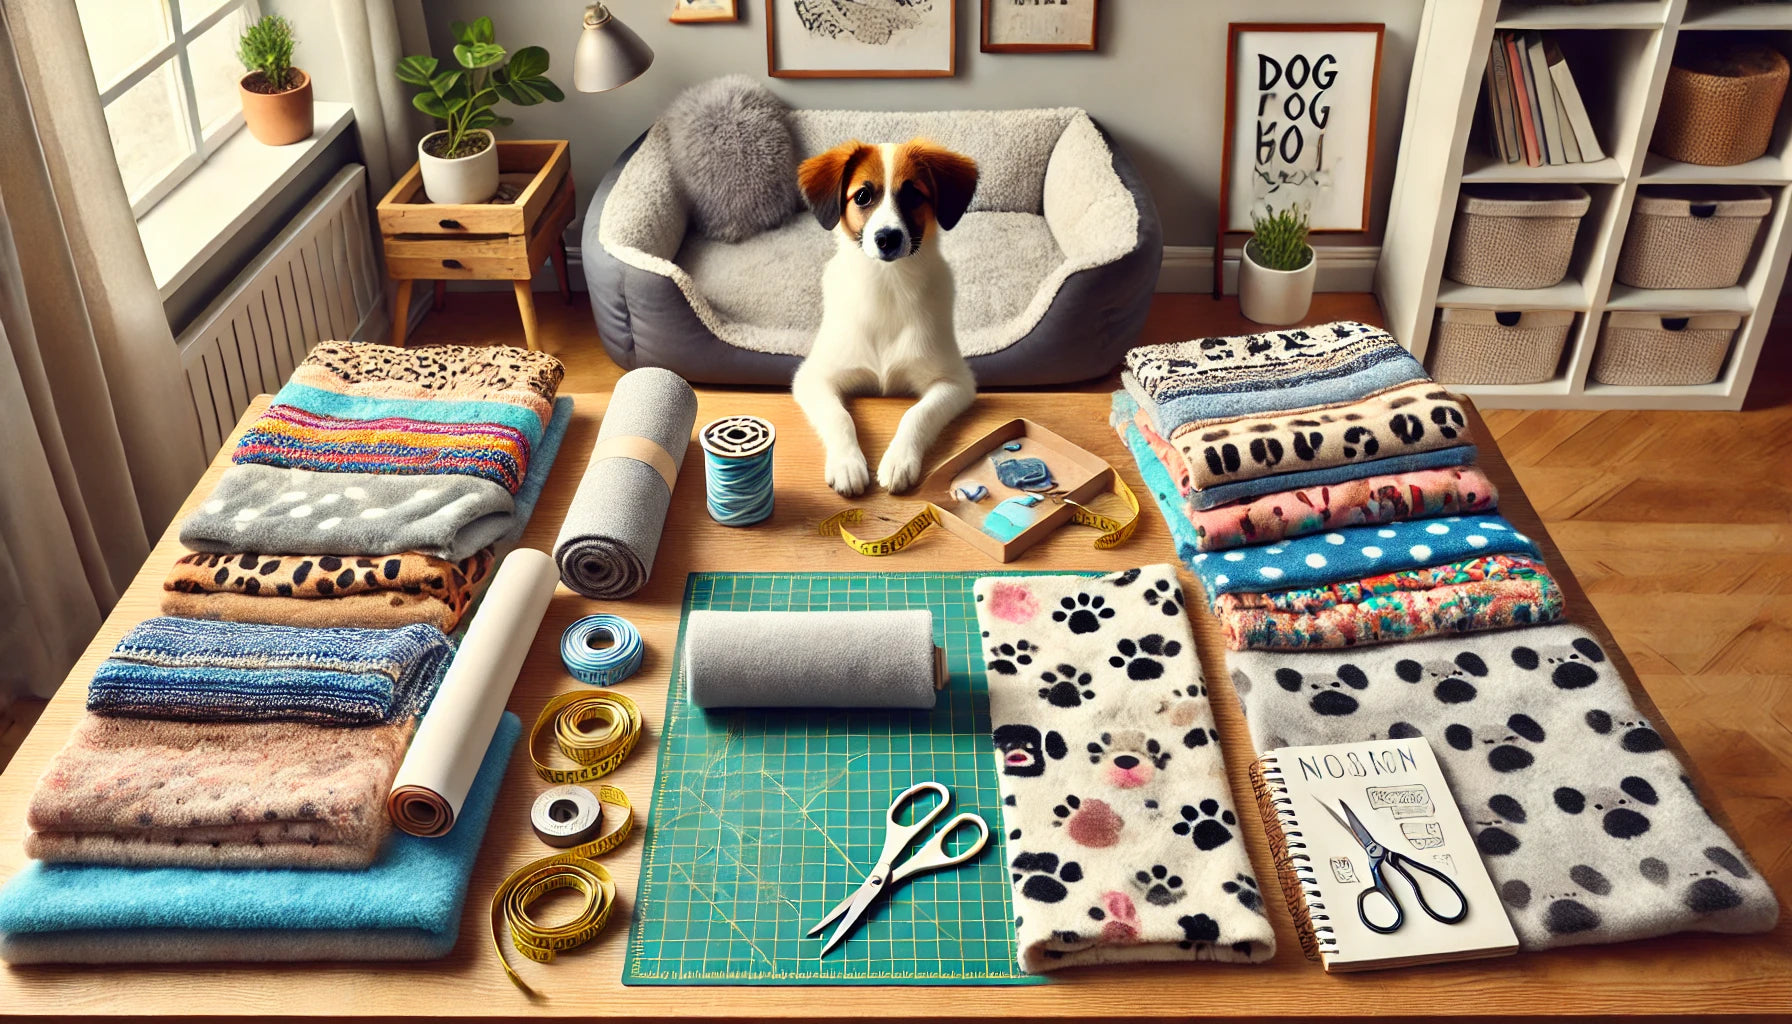 How to Make a Dog Fleece Blanket: Simple DIY Projects for Pet Owners